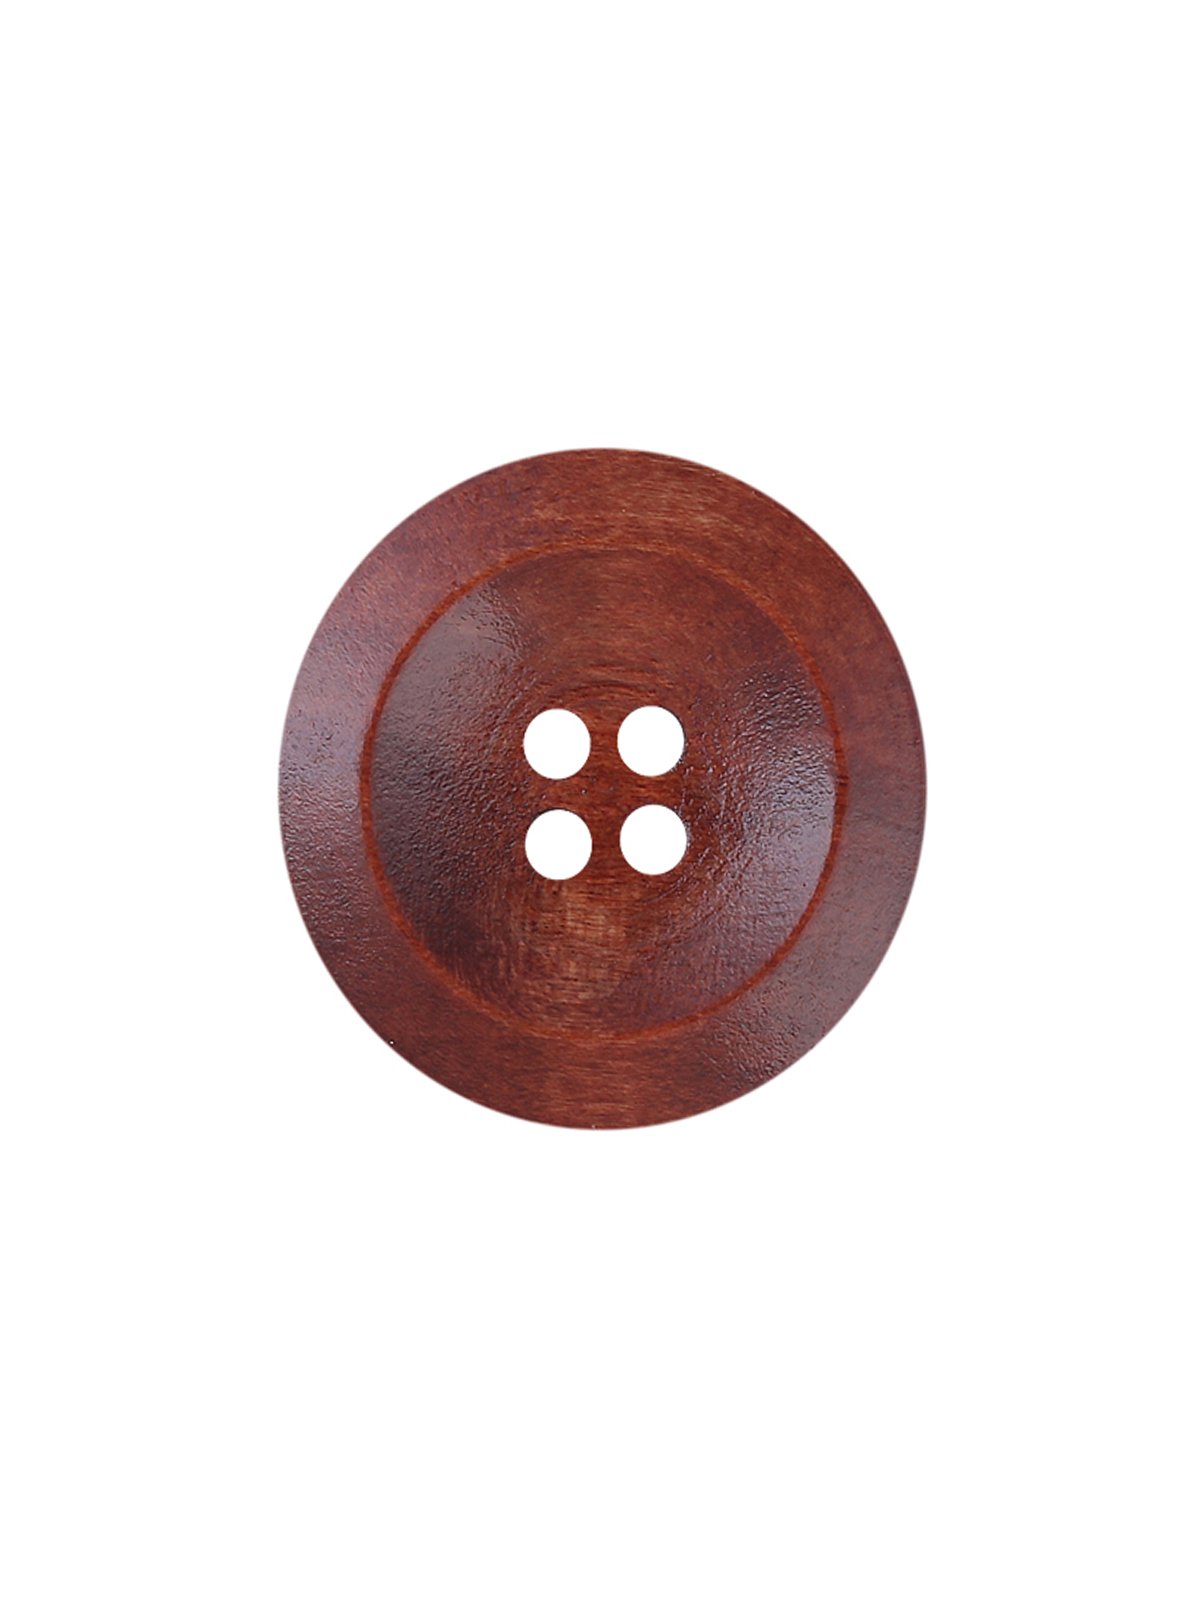 Brown Colour Round Shape 4 Hole Wide Rounded Rim Wooden Button